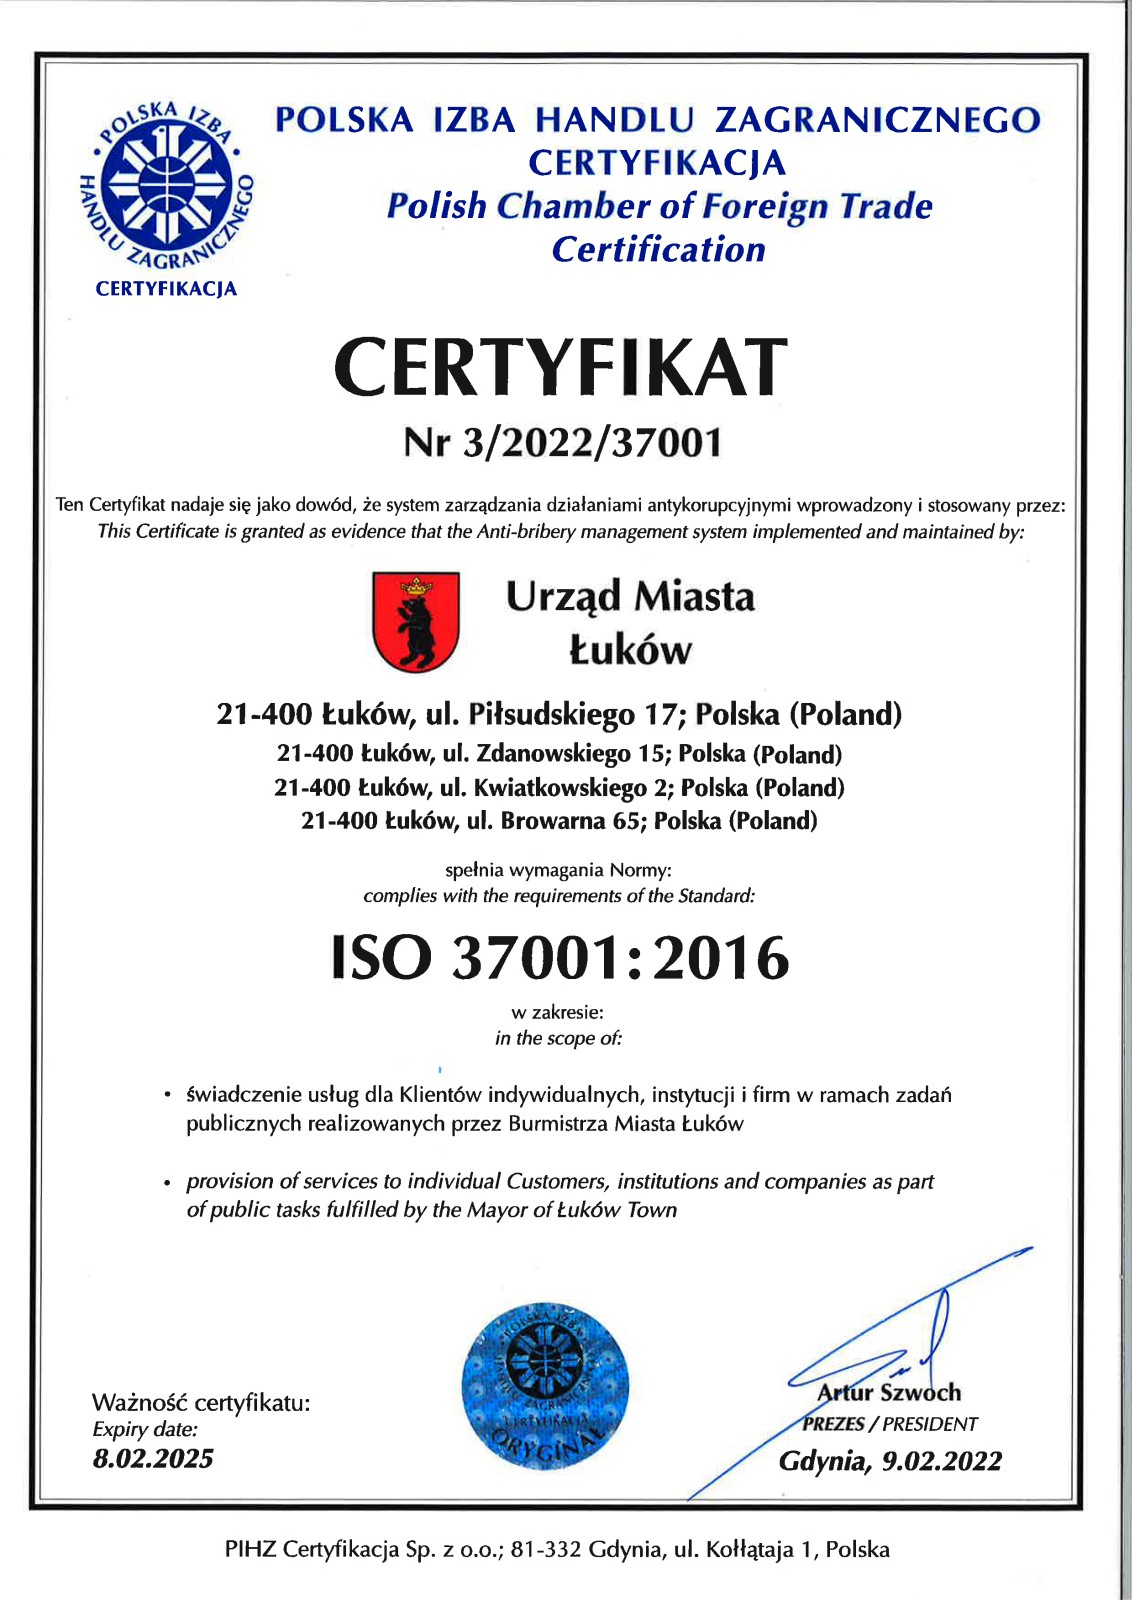 ISO 37001:2016